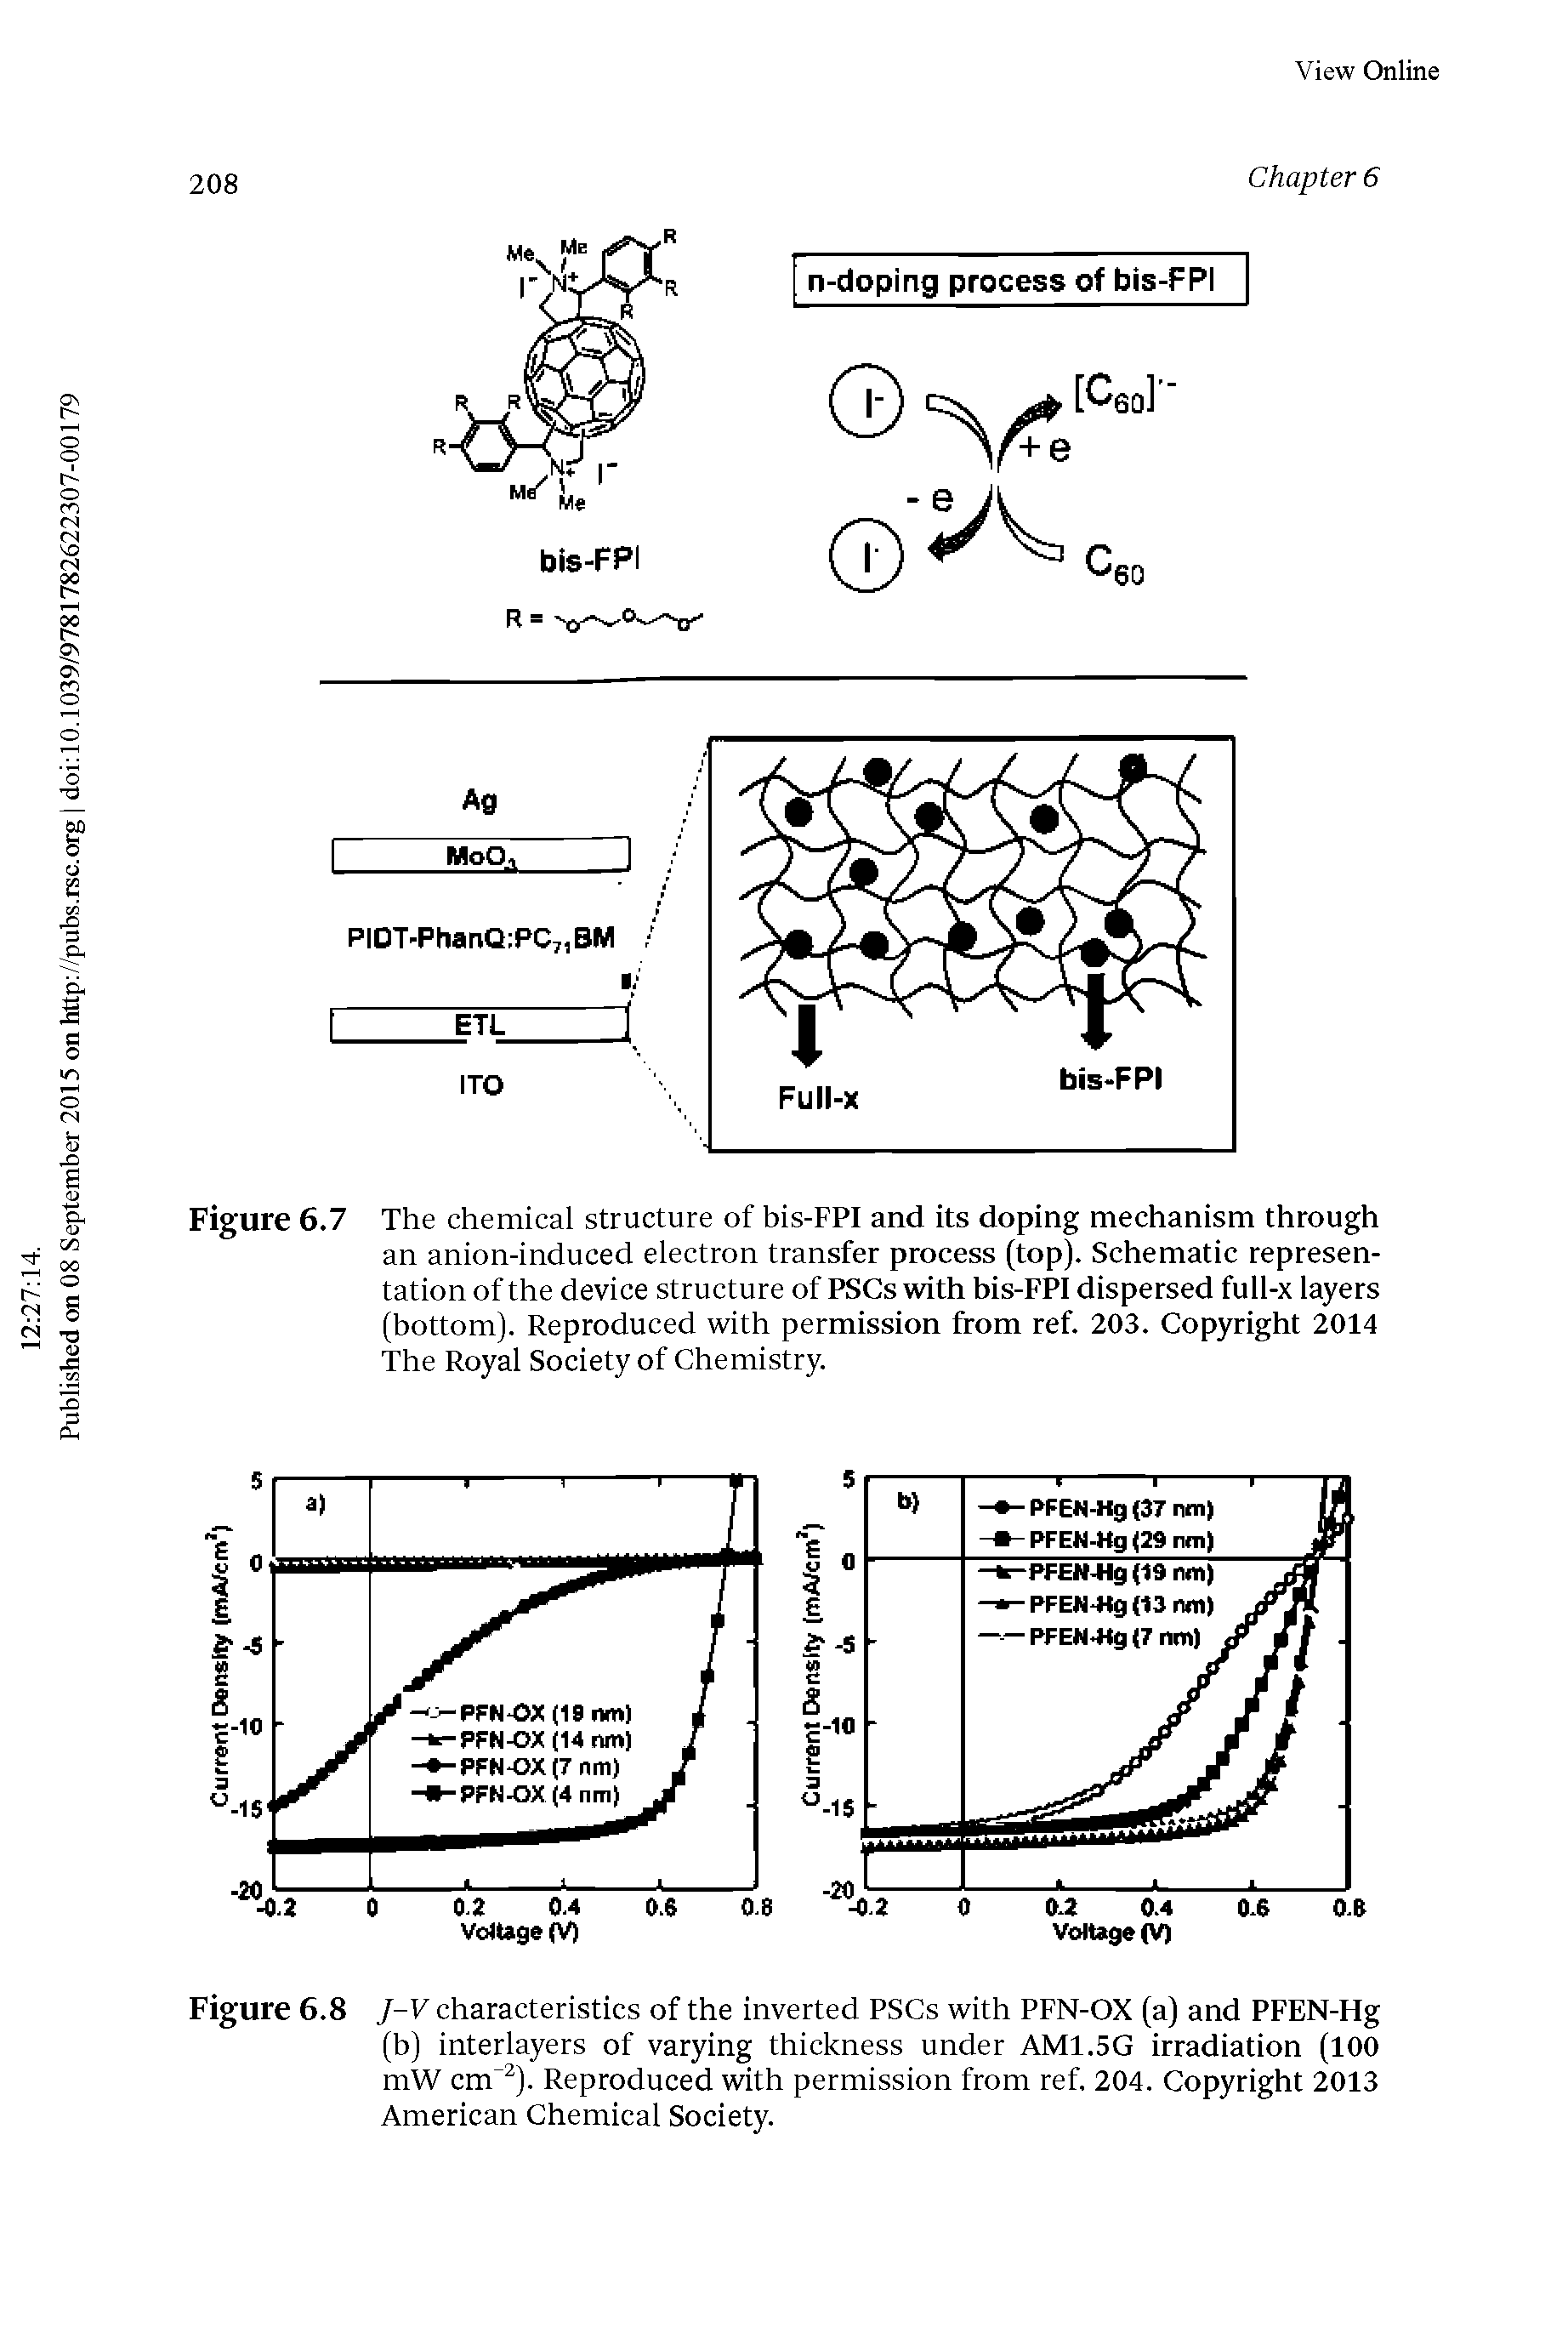 Figure 6.7 The chemical structure of bis-FPI and its doping mechanism through an anion-induced electron transfer process (top). Schematic representation of the device structure of PSCs with bis-FPI dispersed full-x layers (bottom). Reproduced with permission from ref. 203. Cop)right 2014 The Royal Society of Chemistry.